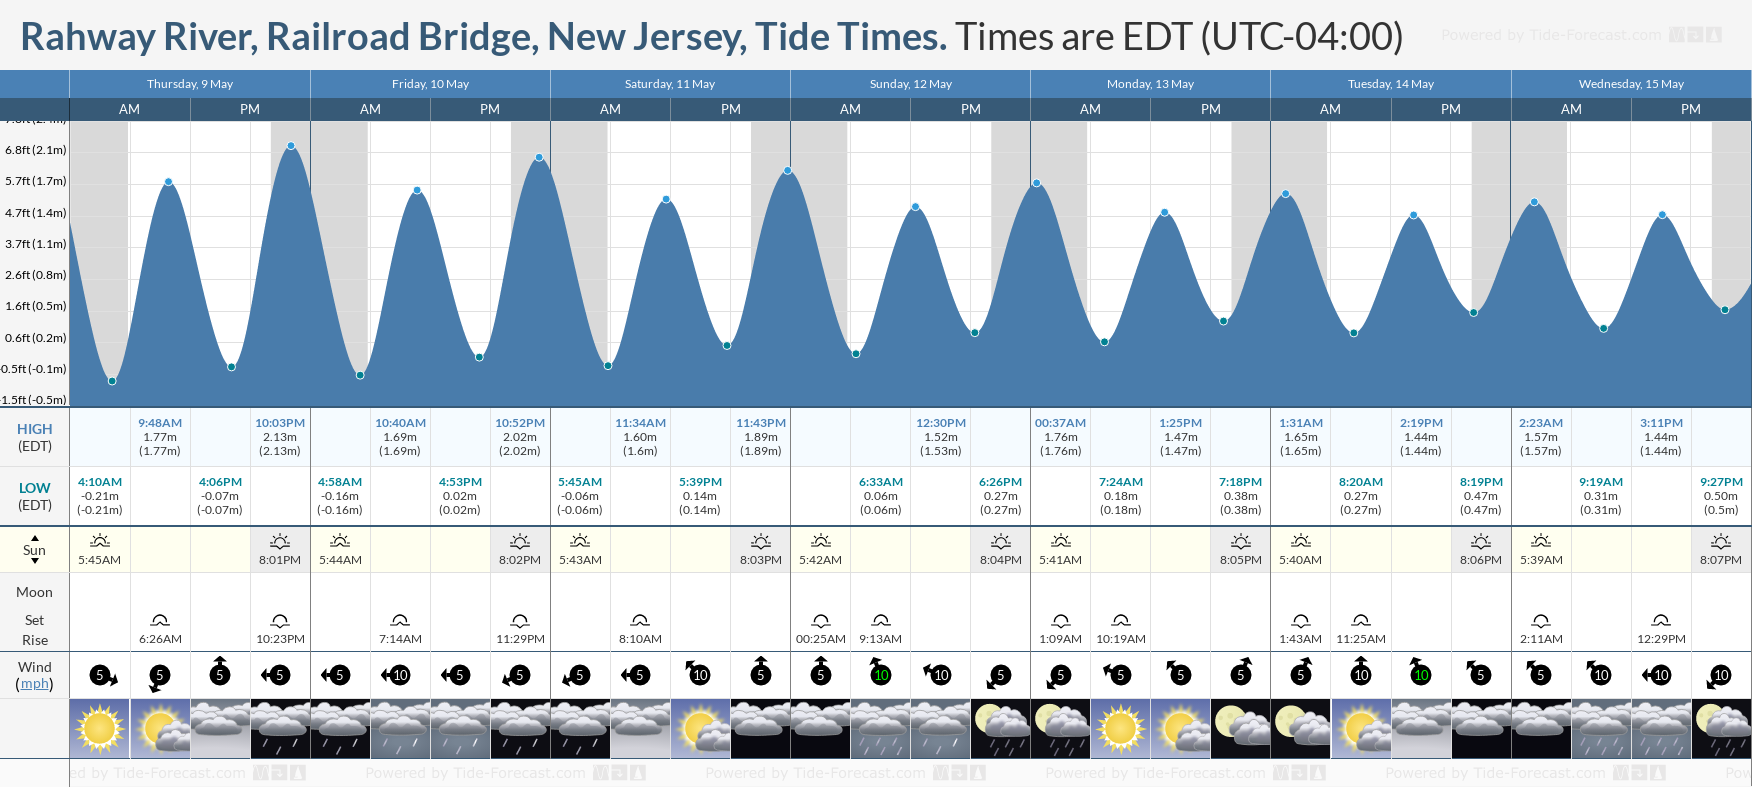 Rahway River, Railroad Bridge, New Jersey Tide Chart including high and low tide tide times for the next 7 days